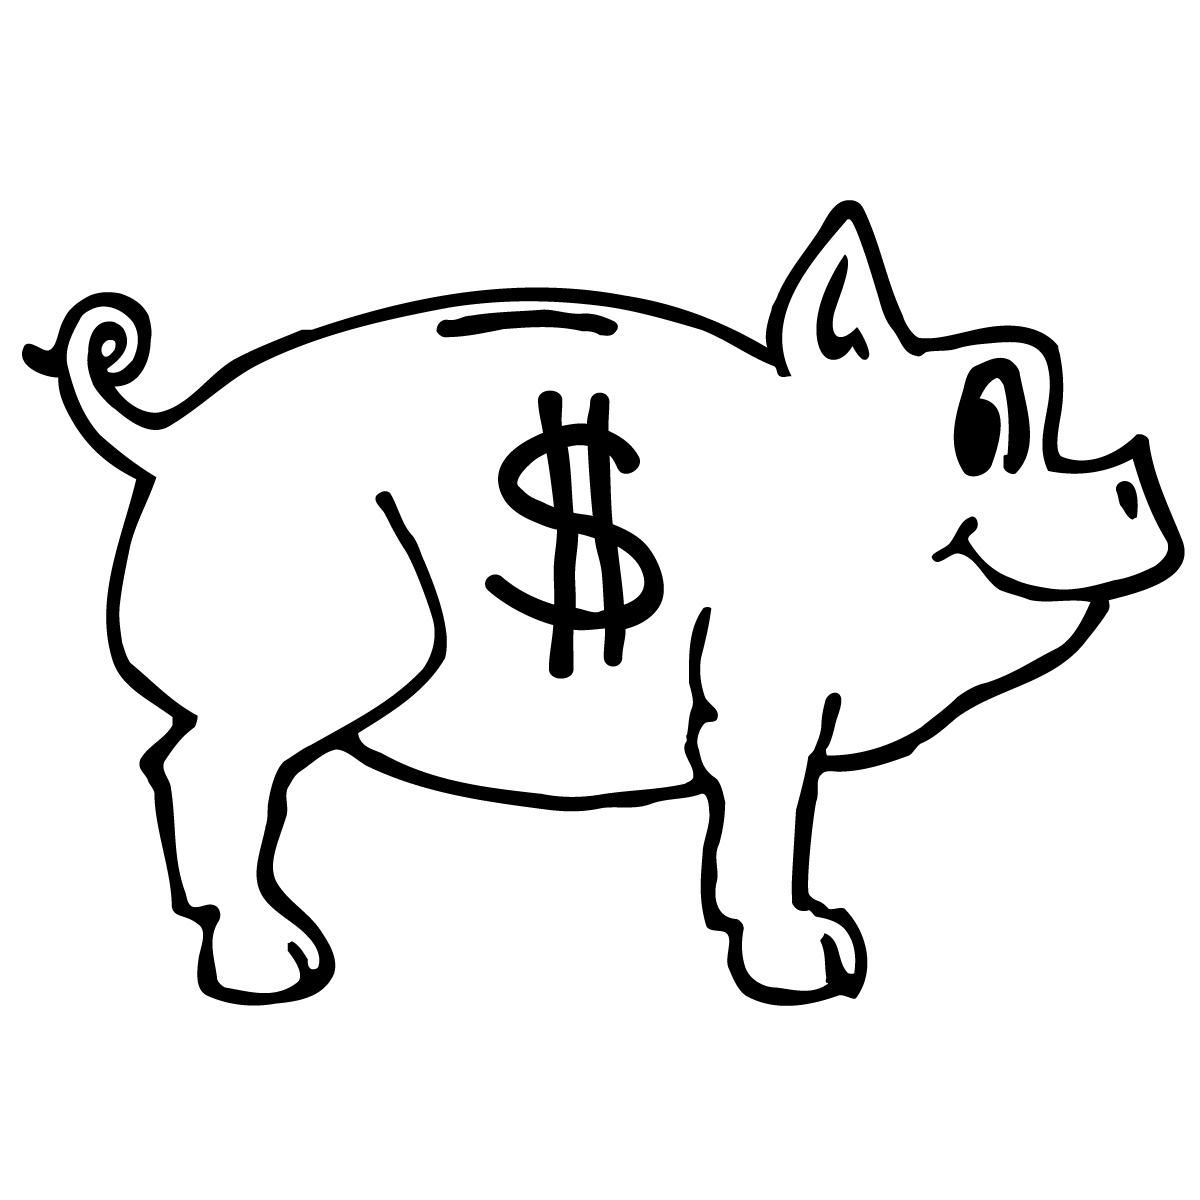 Pix For > Piggy Bank Clipart Black And White